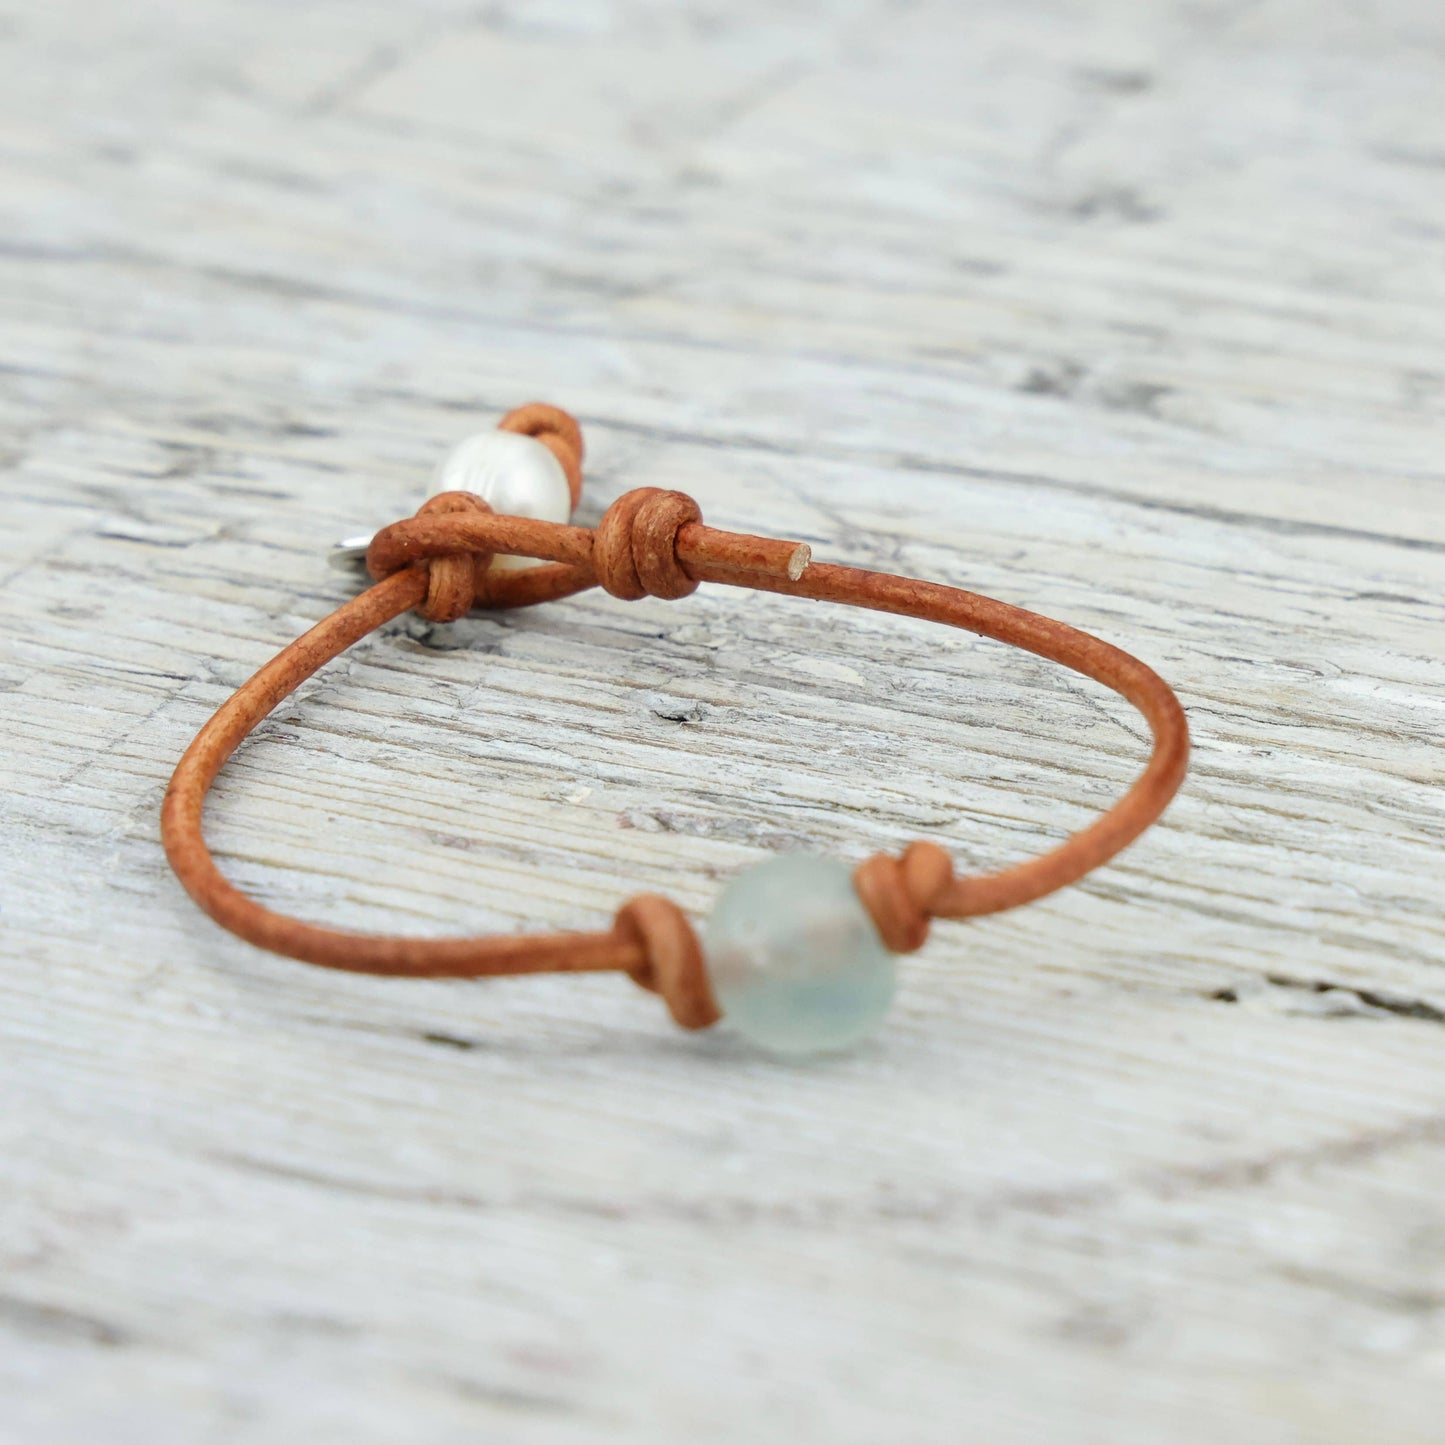 Recycled Sea Glass Leather Bracelet: 6" / Assortment